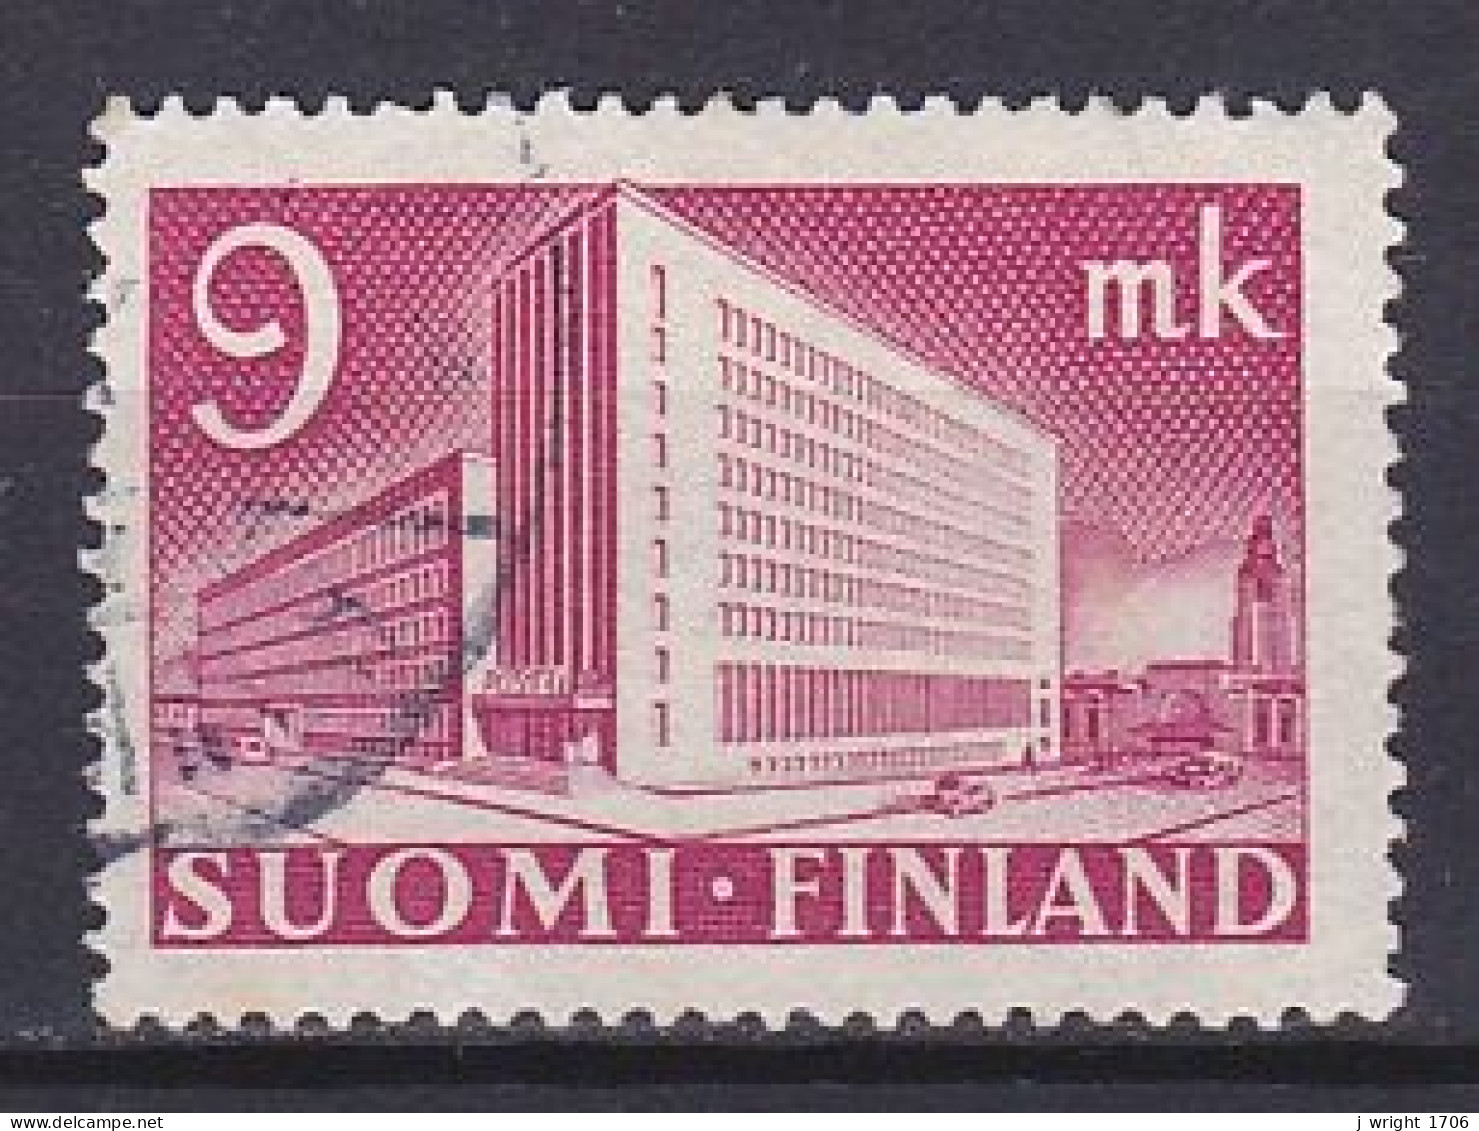 Finland, 1942, Helsinki Post Office, 9mk, USED - Used Stamps